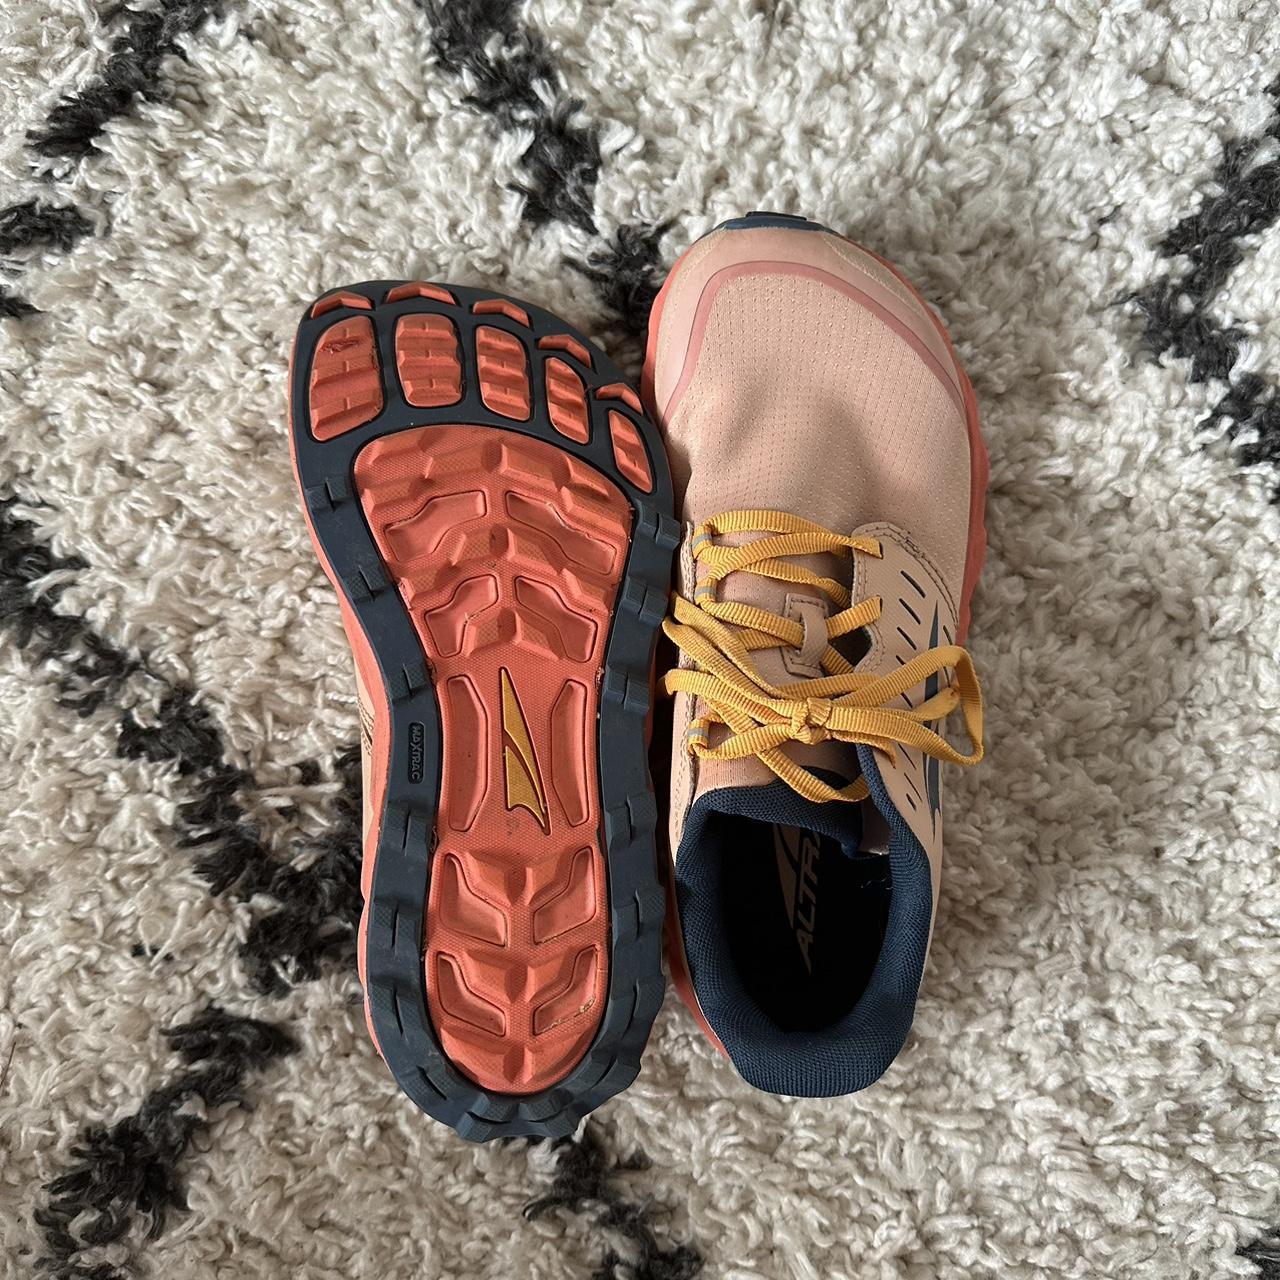 Altra superior 5 running shoes. So comfy, great for... - Depop